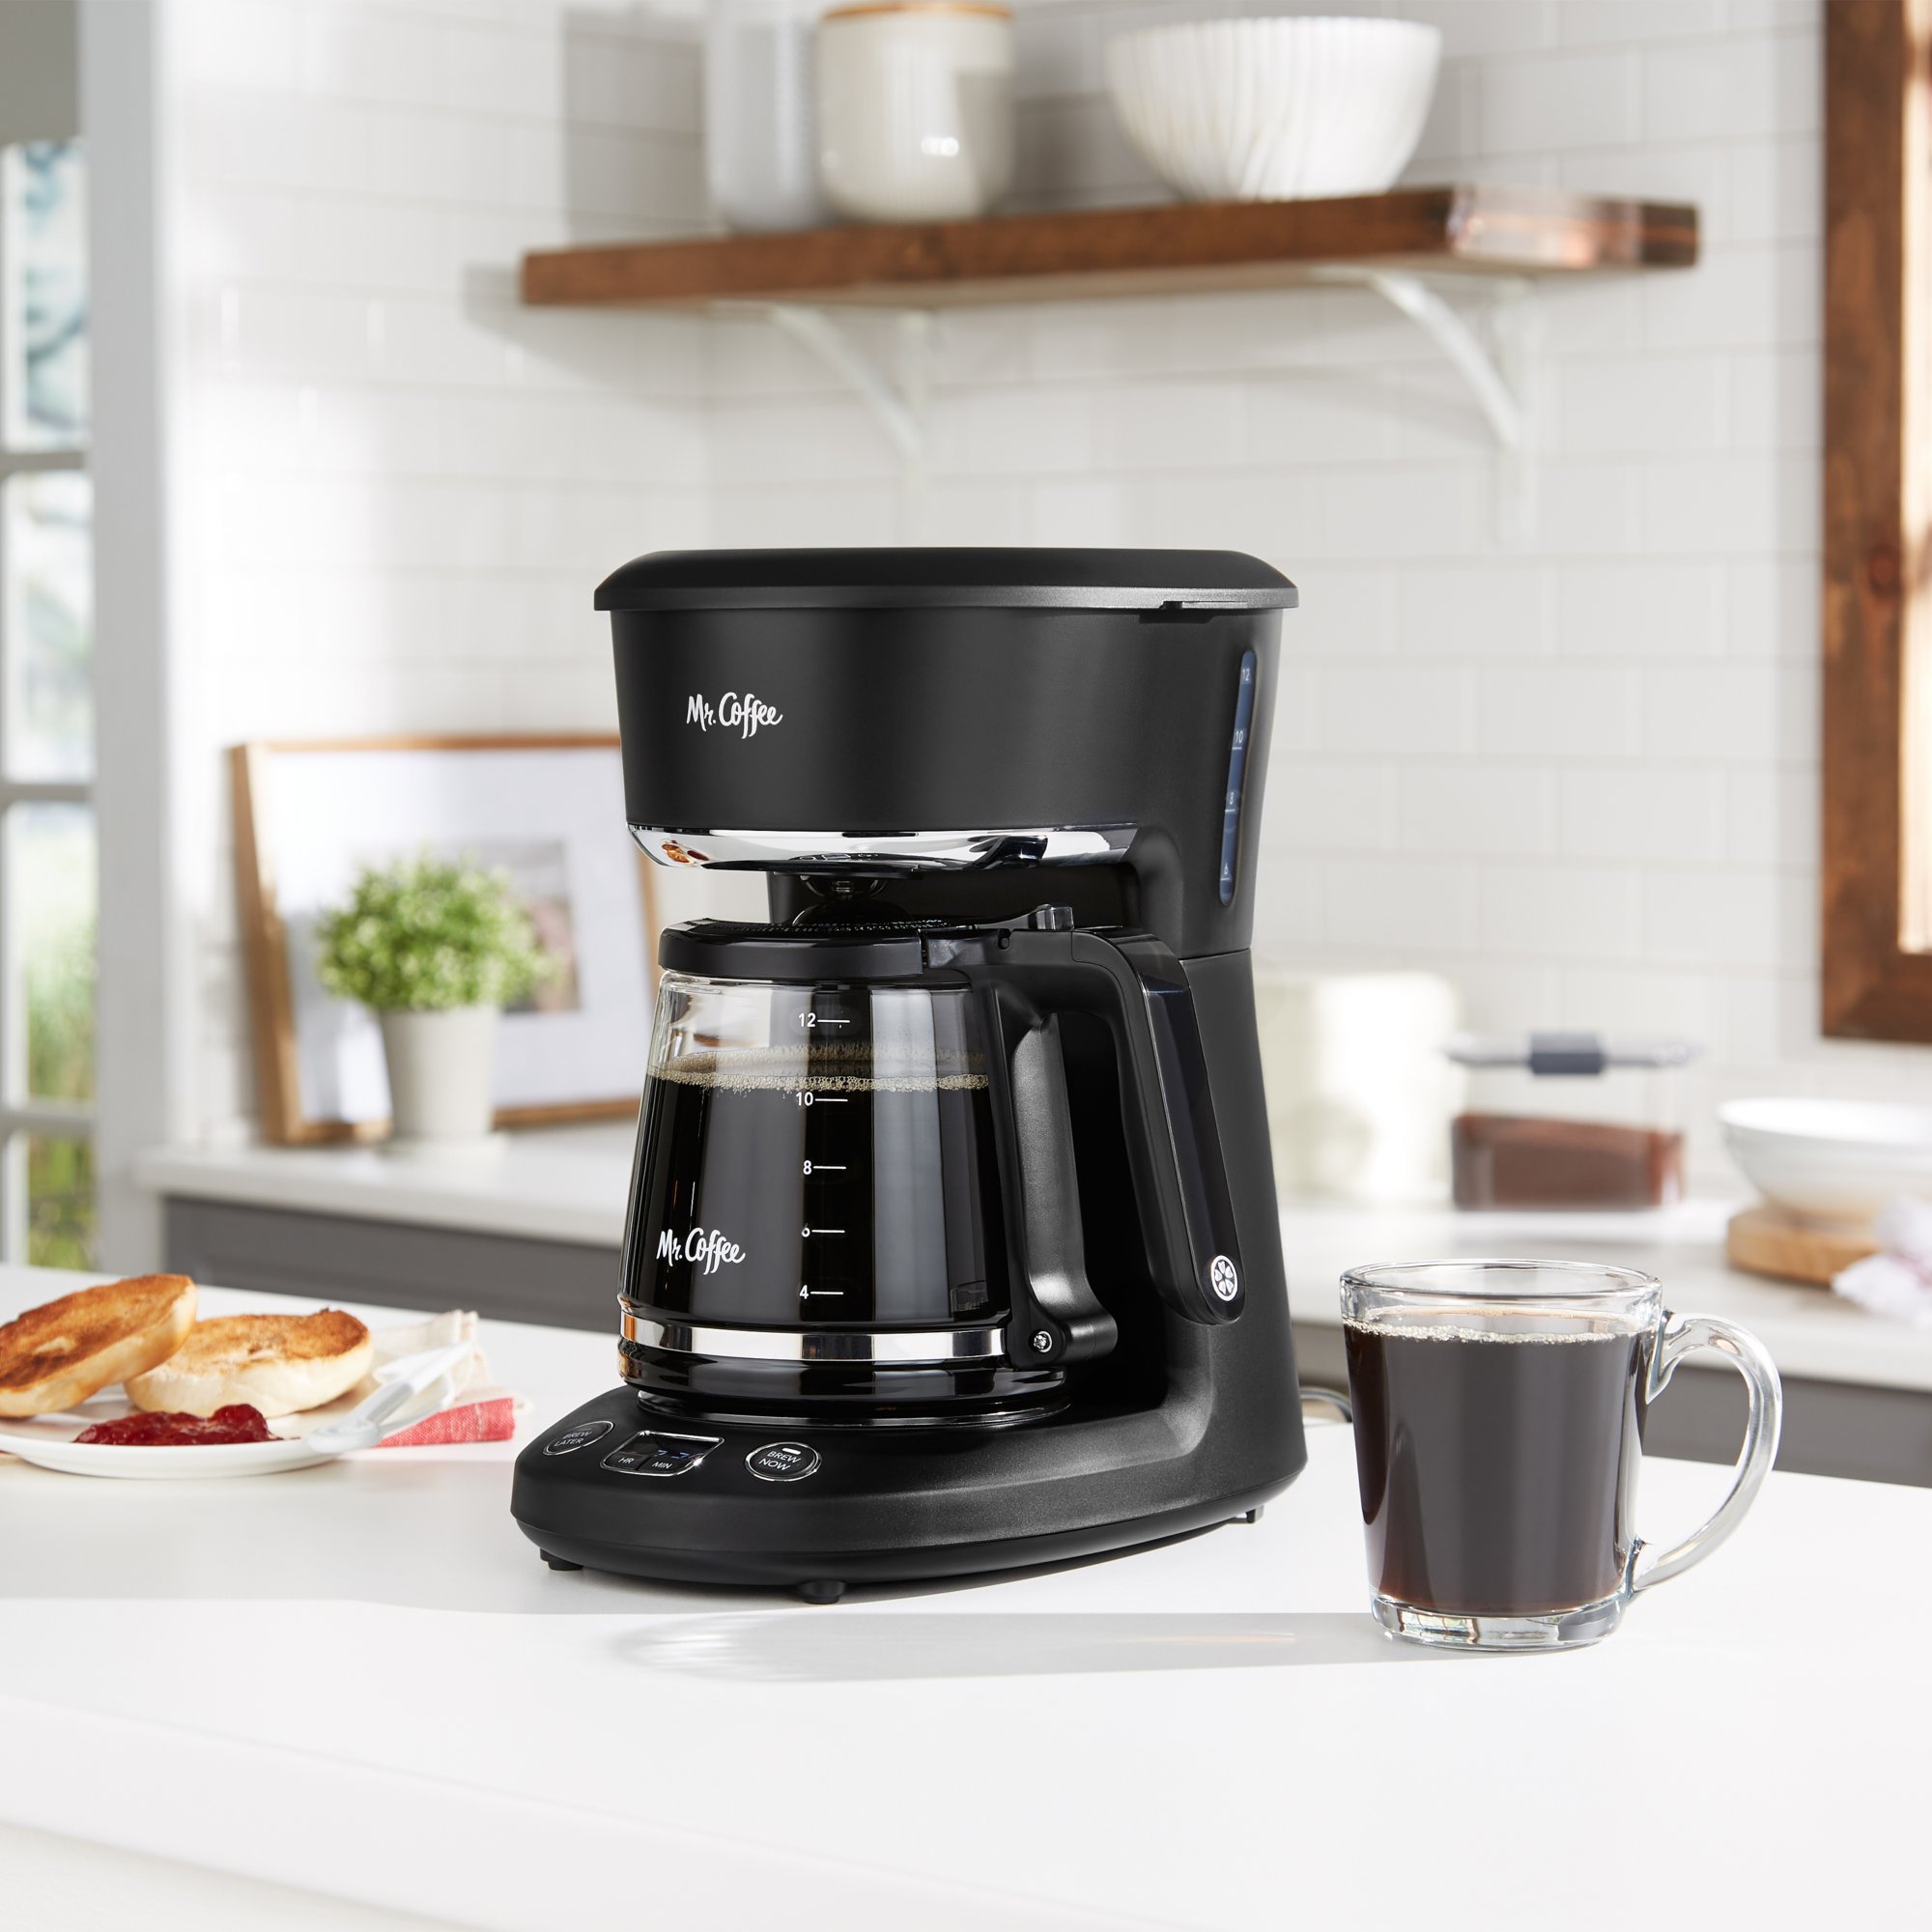 Mr. Coffee 5-Cup Programmable Coffee Maker, 25 oz. Mini Brew, Brew Now or  Later, Arctic & Chrome